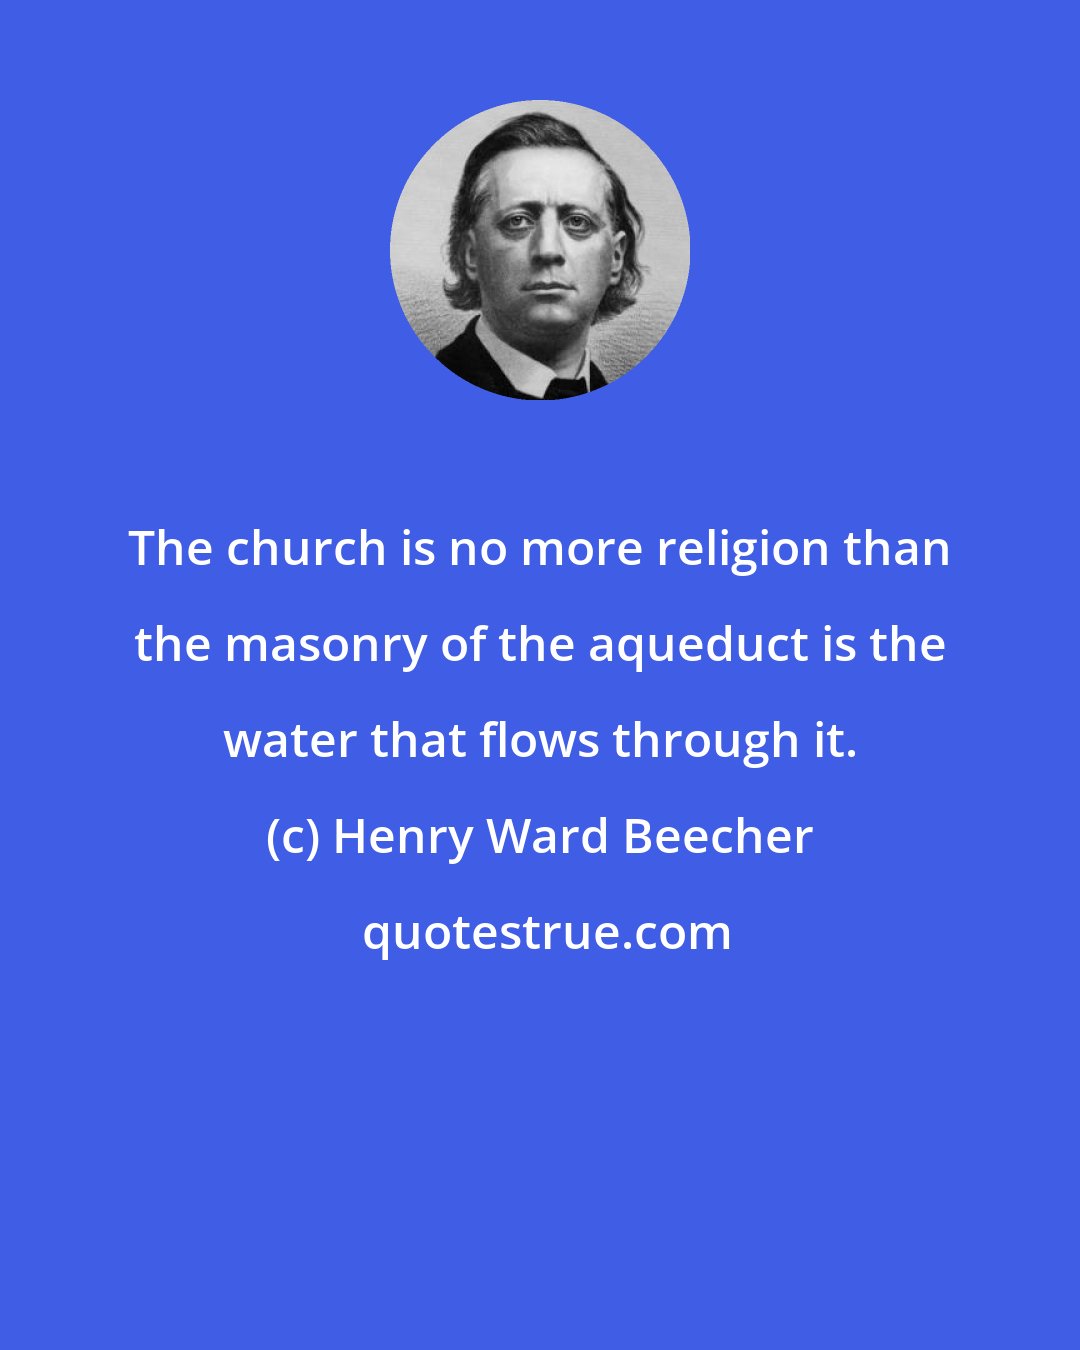 Henry Ward Beecher: The church is no more religion than the masonry of the aqueduct is the water that flows through it.